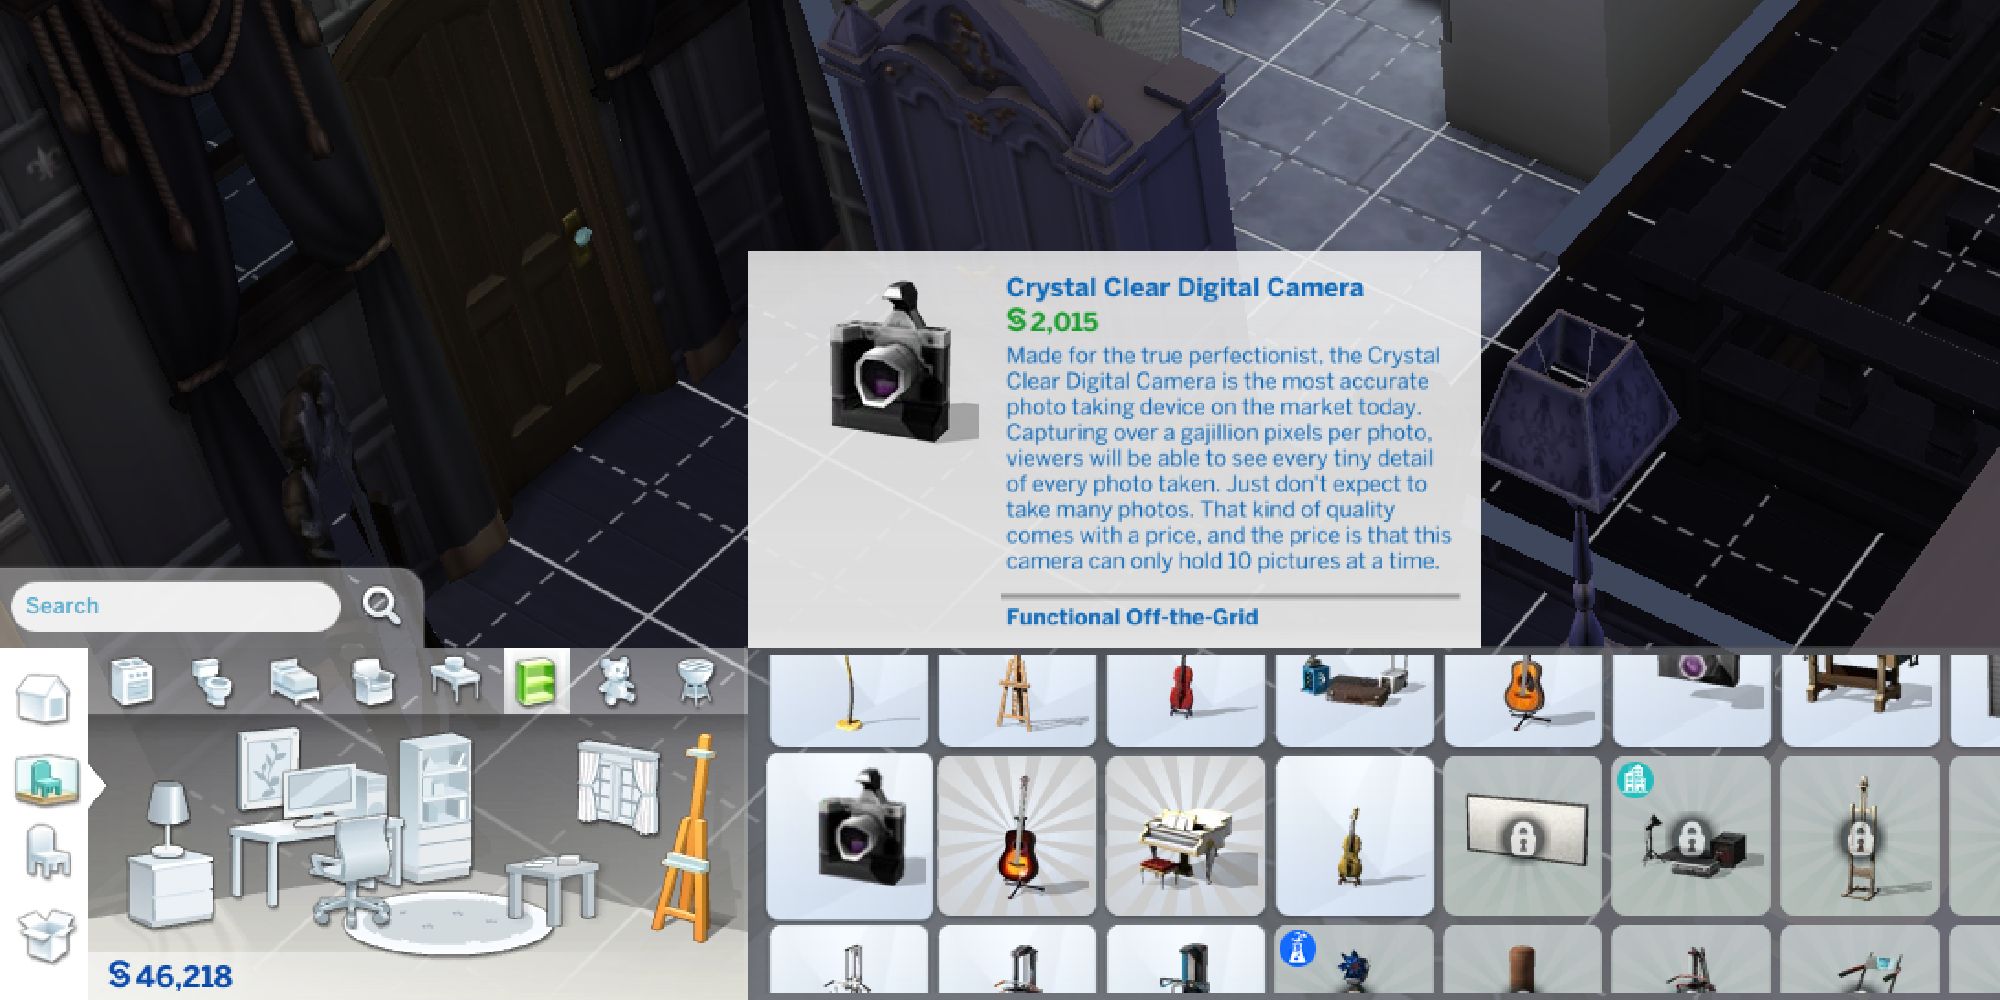 Sims 4 camera purchase option in construction mode.